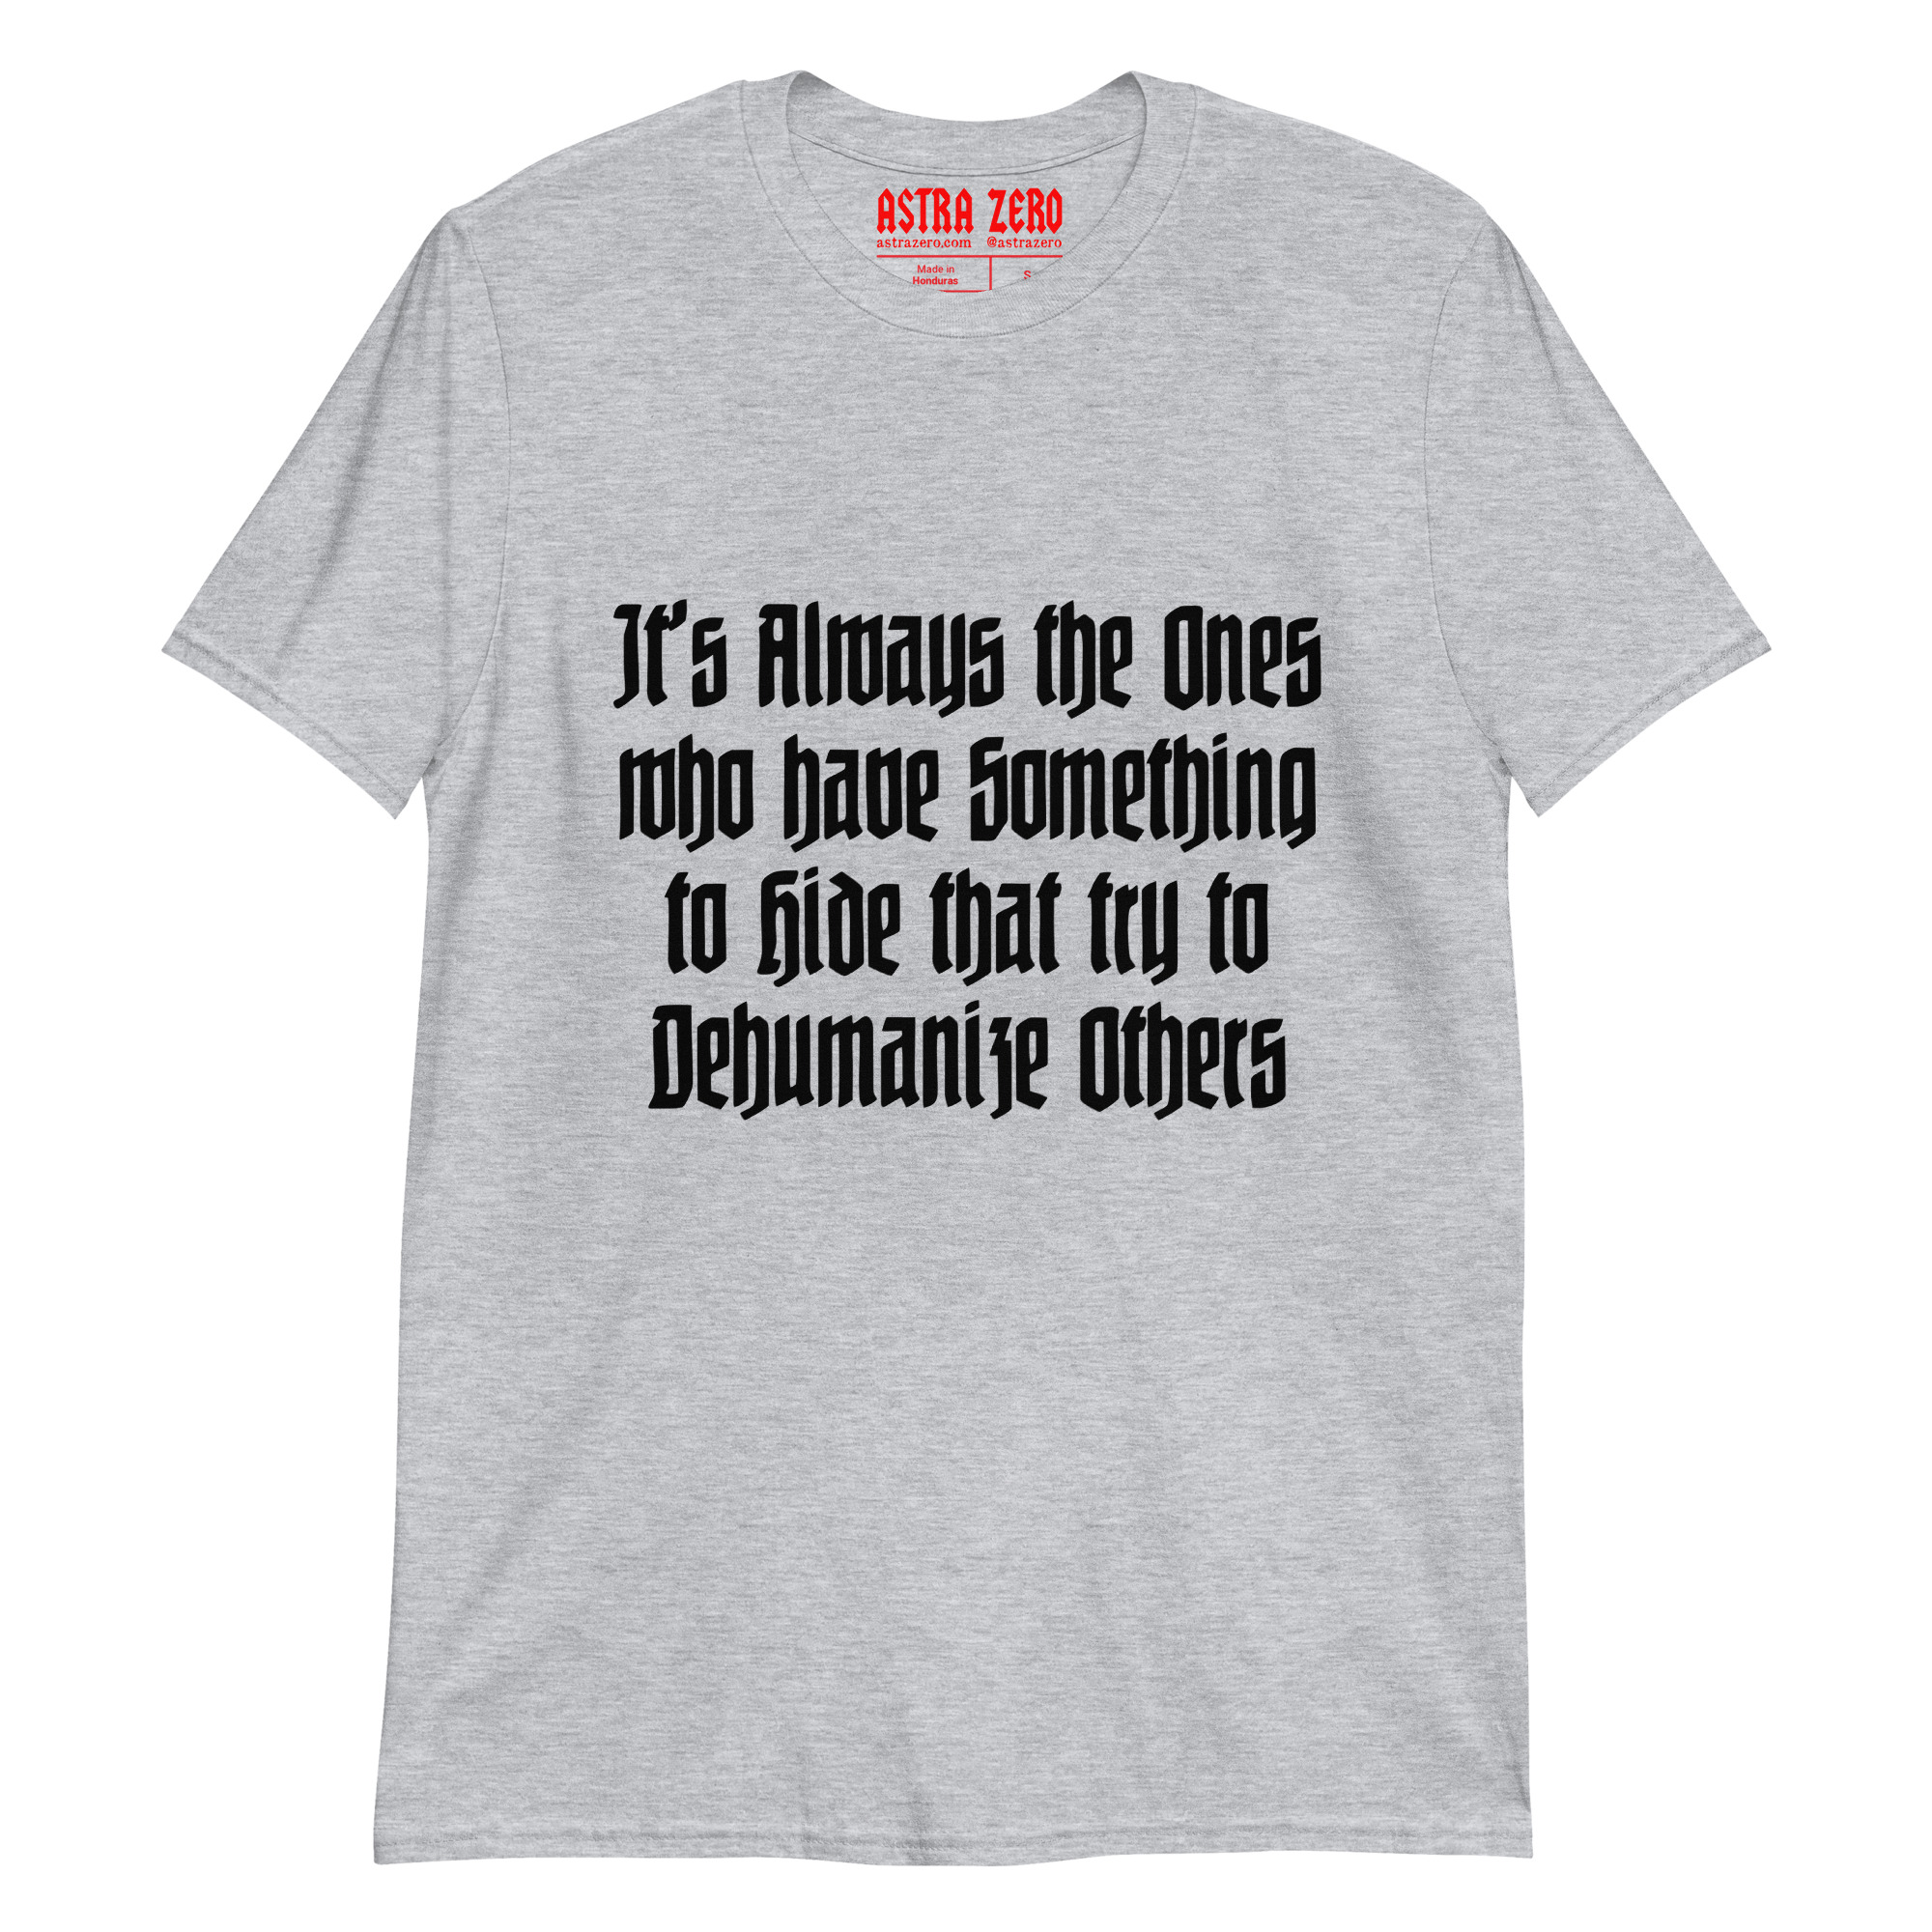 Featured image for “It’s Always the Ones who have Something to Hide - Short-Sleeve Unisex T-Shirt”